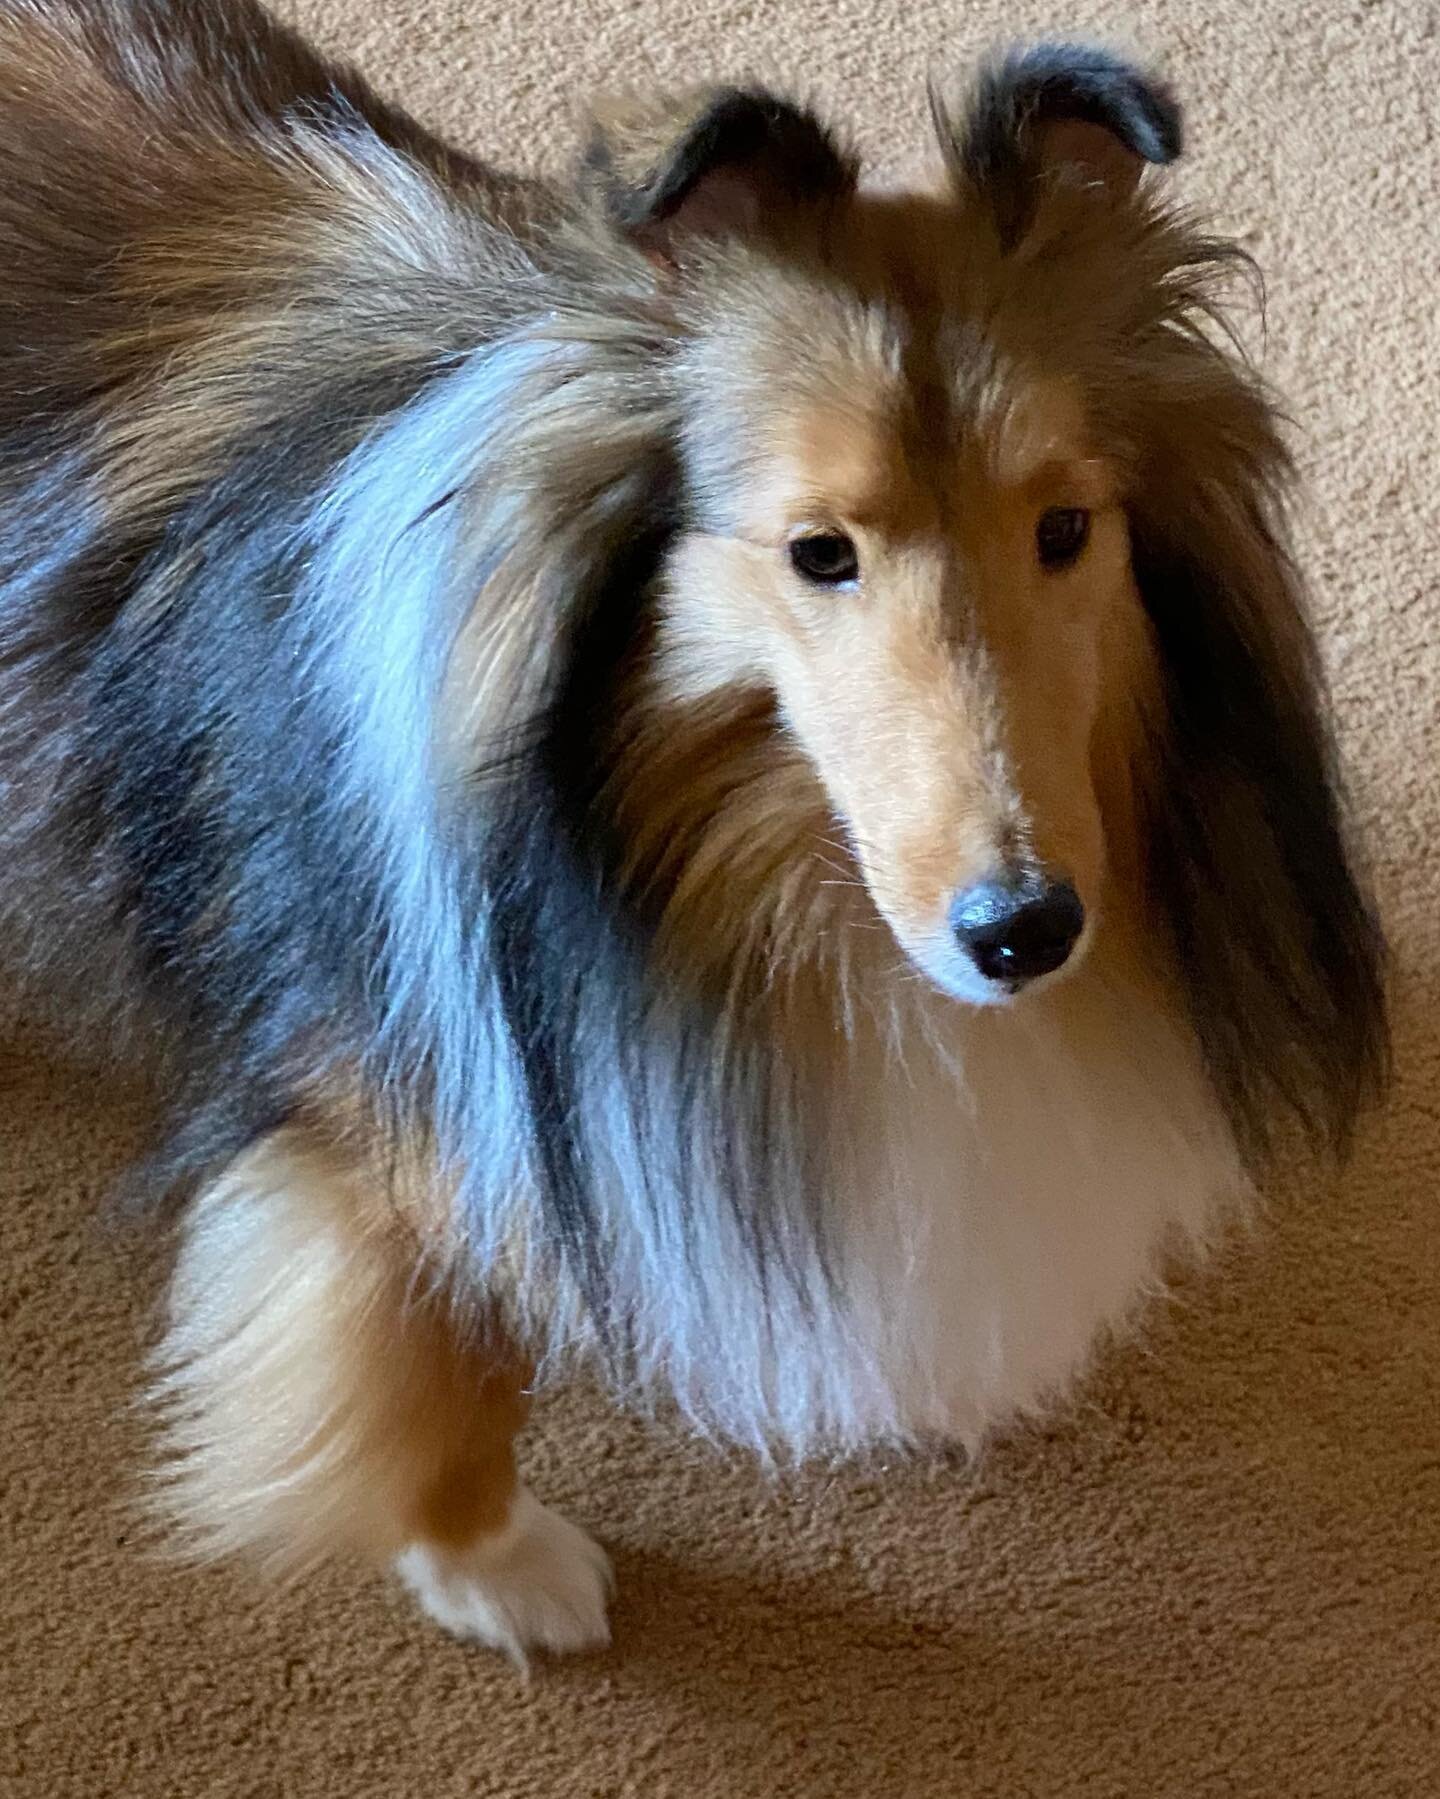 This gorgeous creature, who needs no filter, is Tanner and he let us photograph his kitchen this afternoon.  We hope to have photos early next week for you.  #dogsofinstagram #miniaturecollie